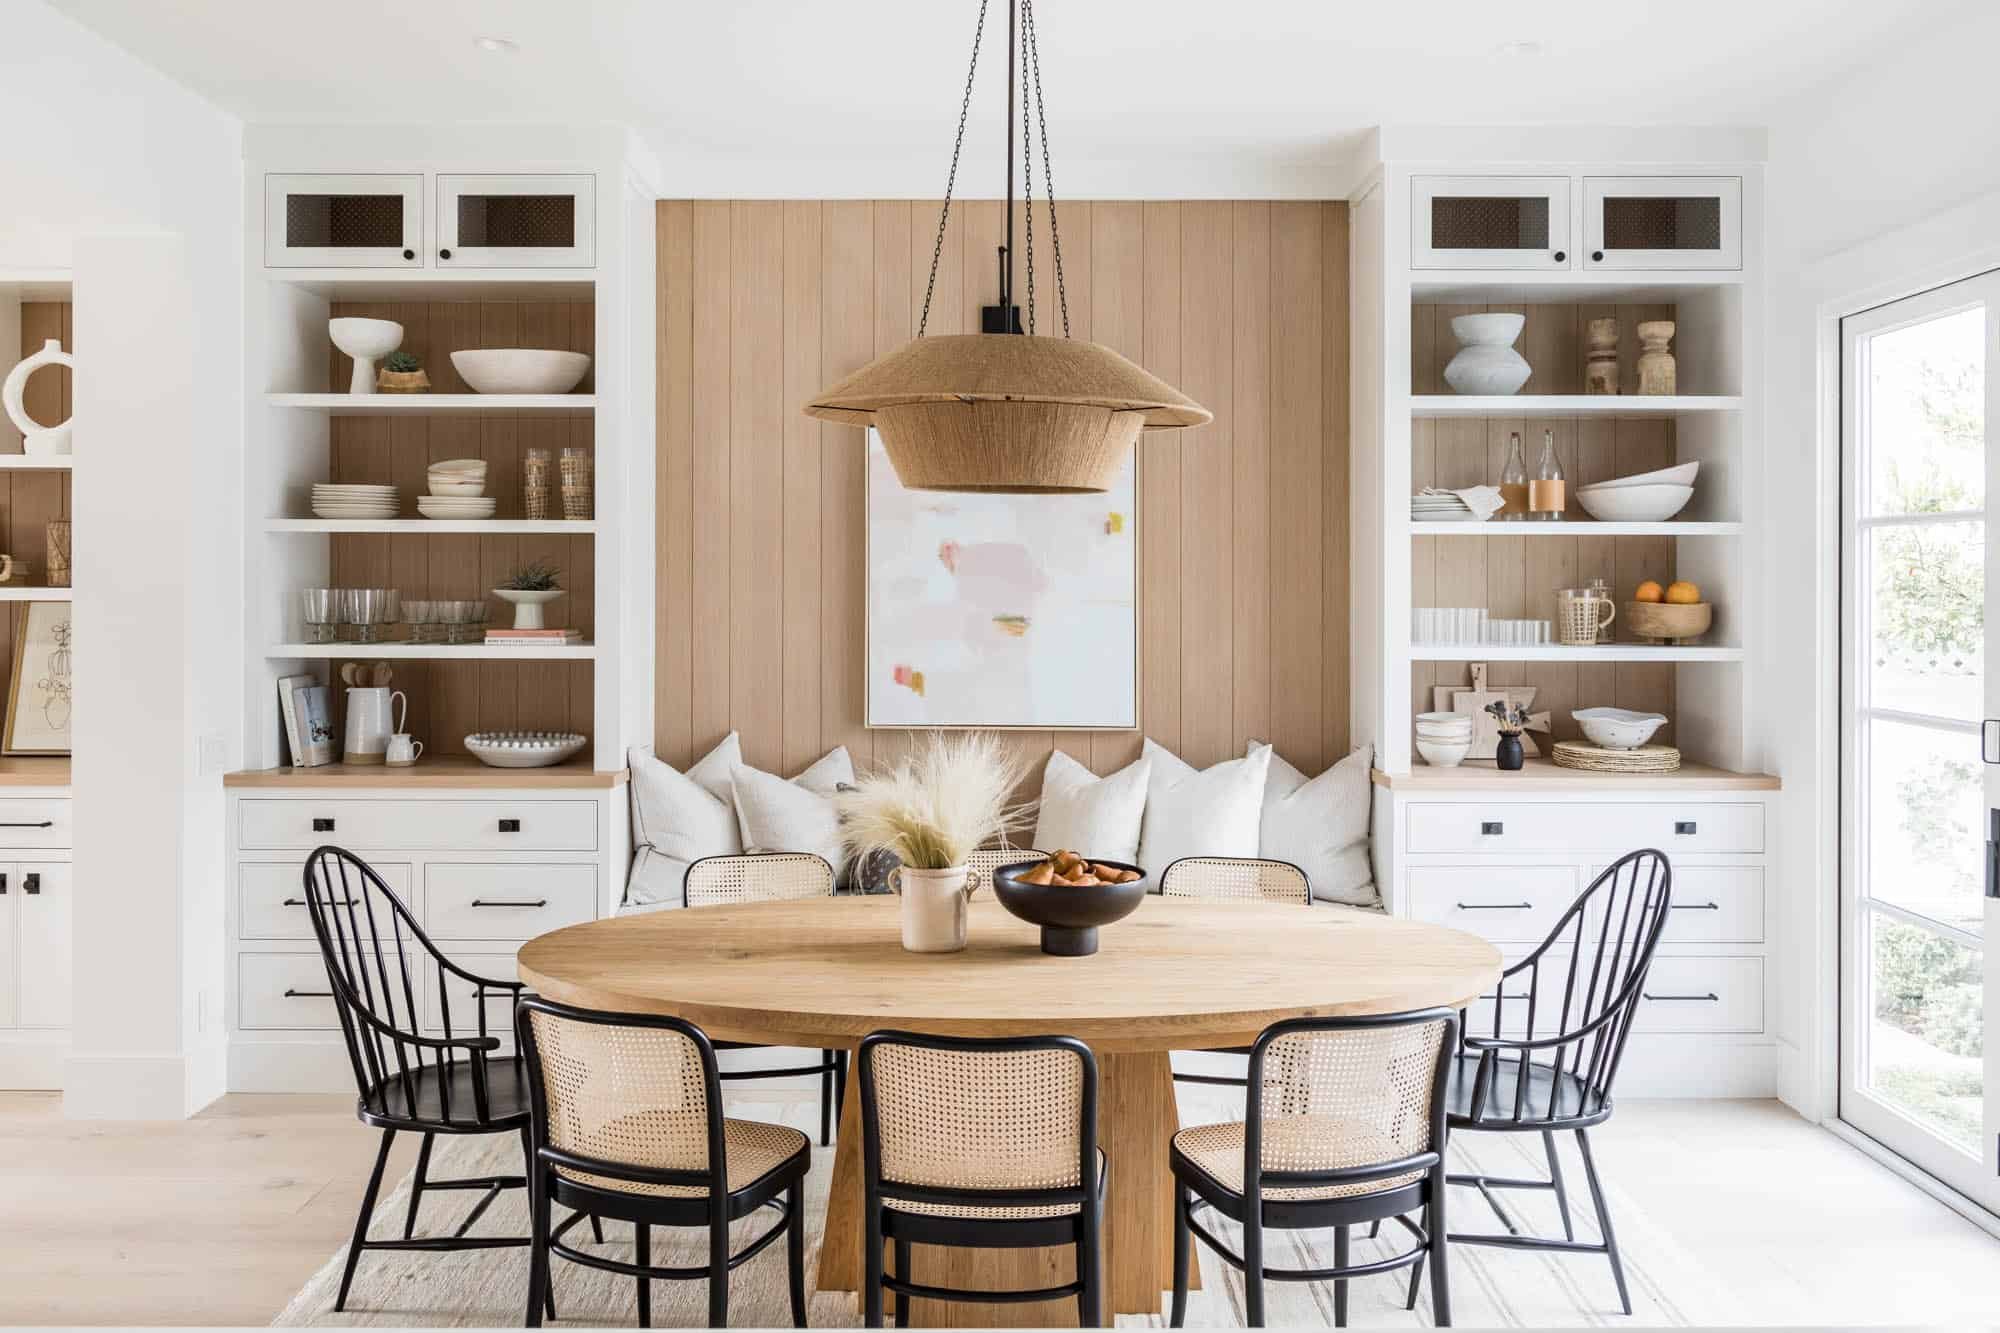 How to Mix and Match Dining Chairs in a Coastal Modern Style